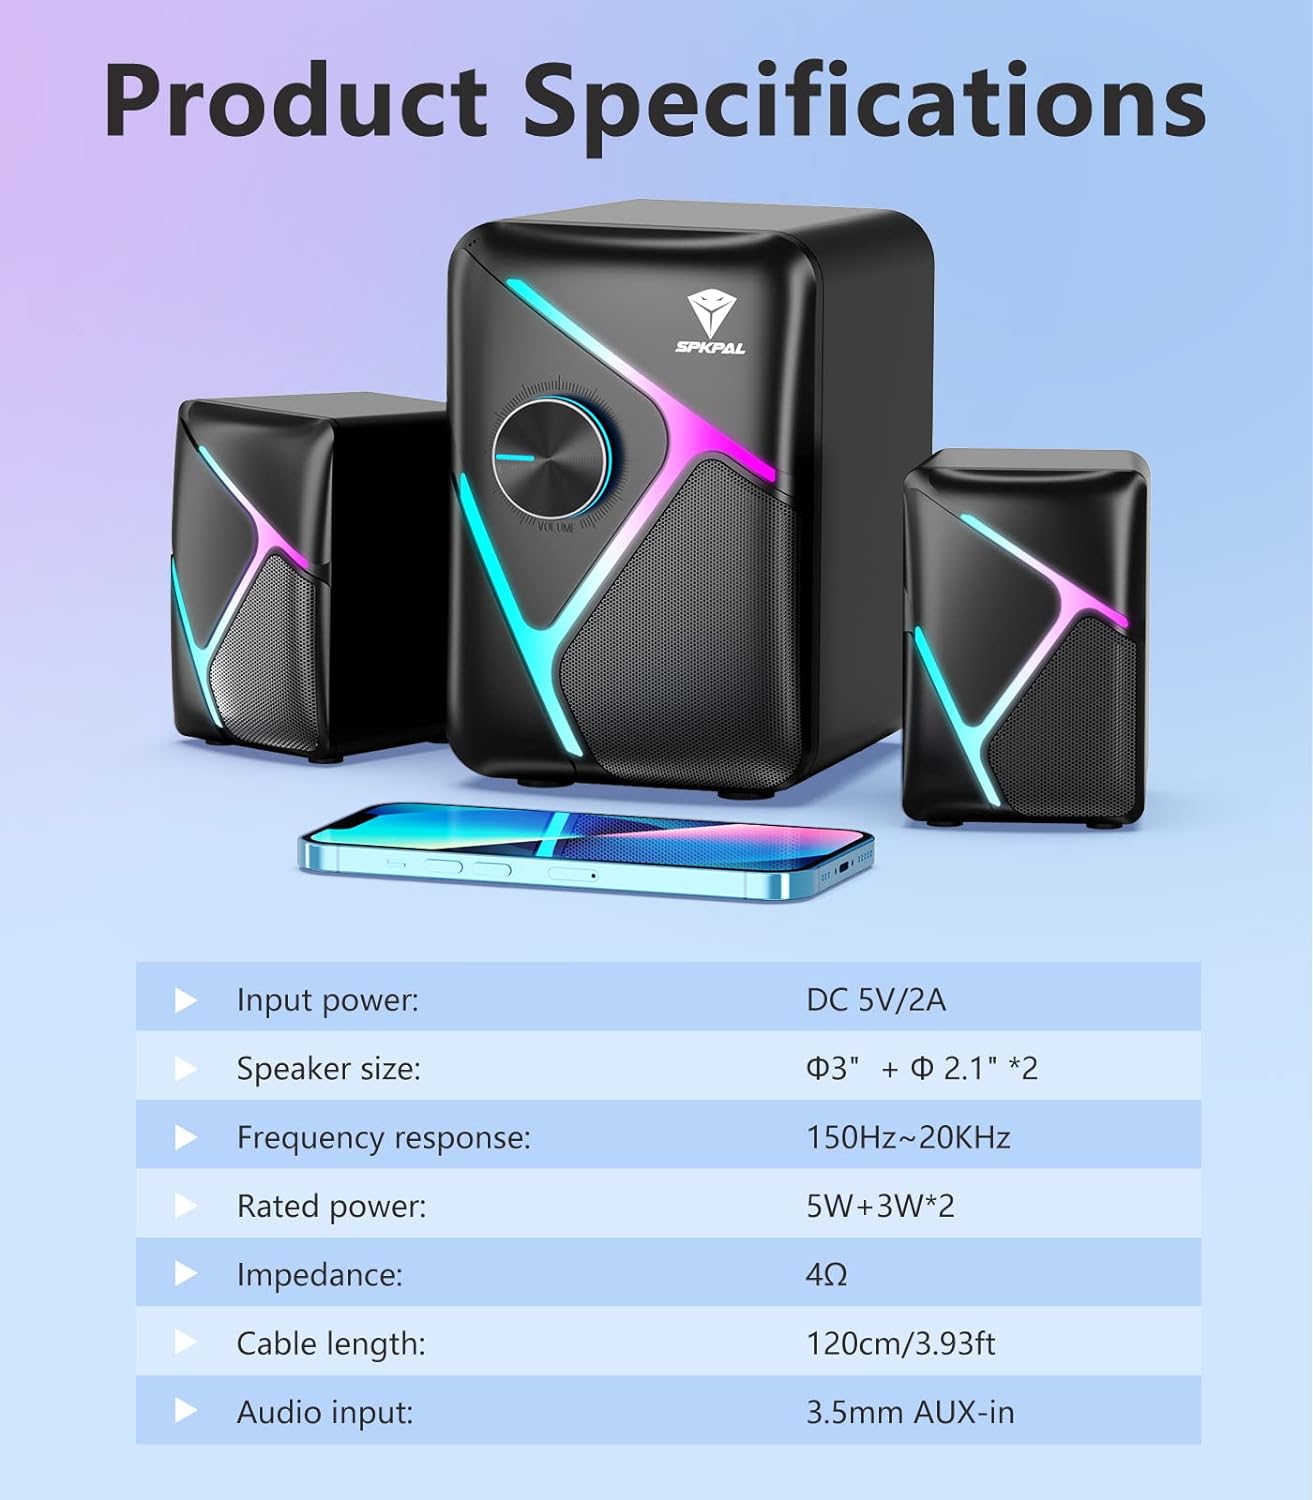 SPKPAL 2.1 Computer Speakers for Desktop with Subwoofer, Dynamic RGB PC Speakers with 11W Stereo Sound, USB Powered Multimedia Speaker System with 3.5mm AUX-in for Laptop, Tablet, Monitor, Phone